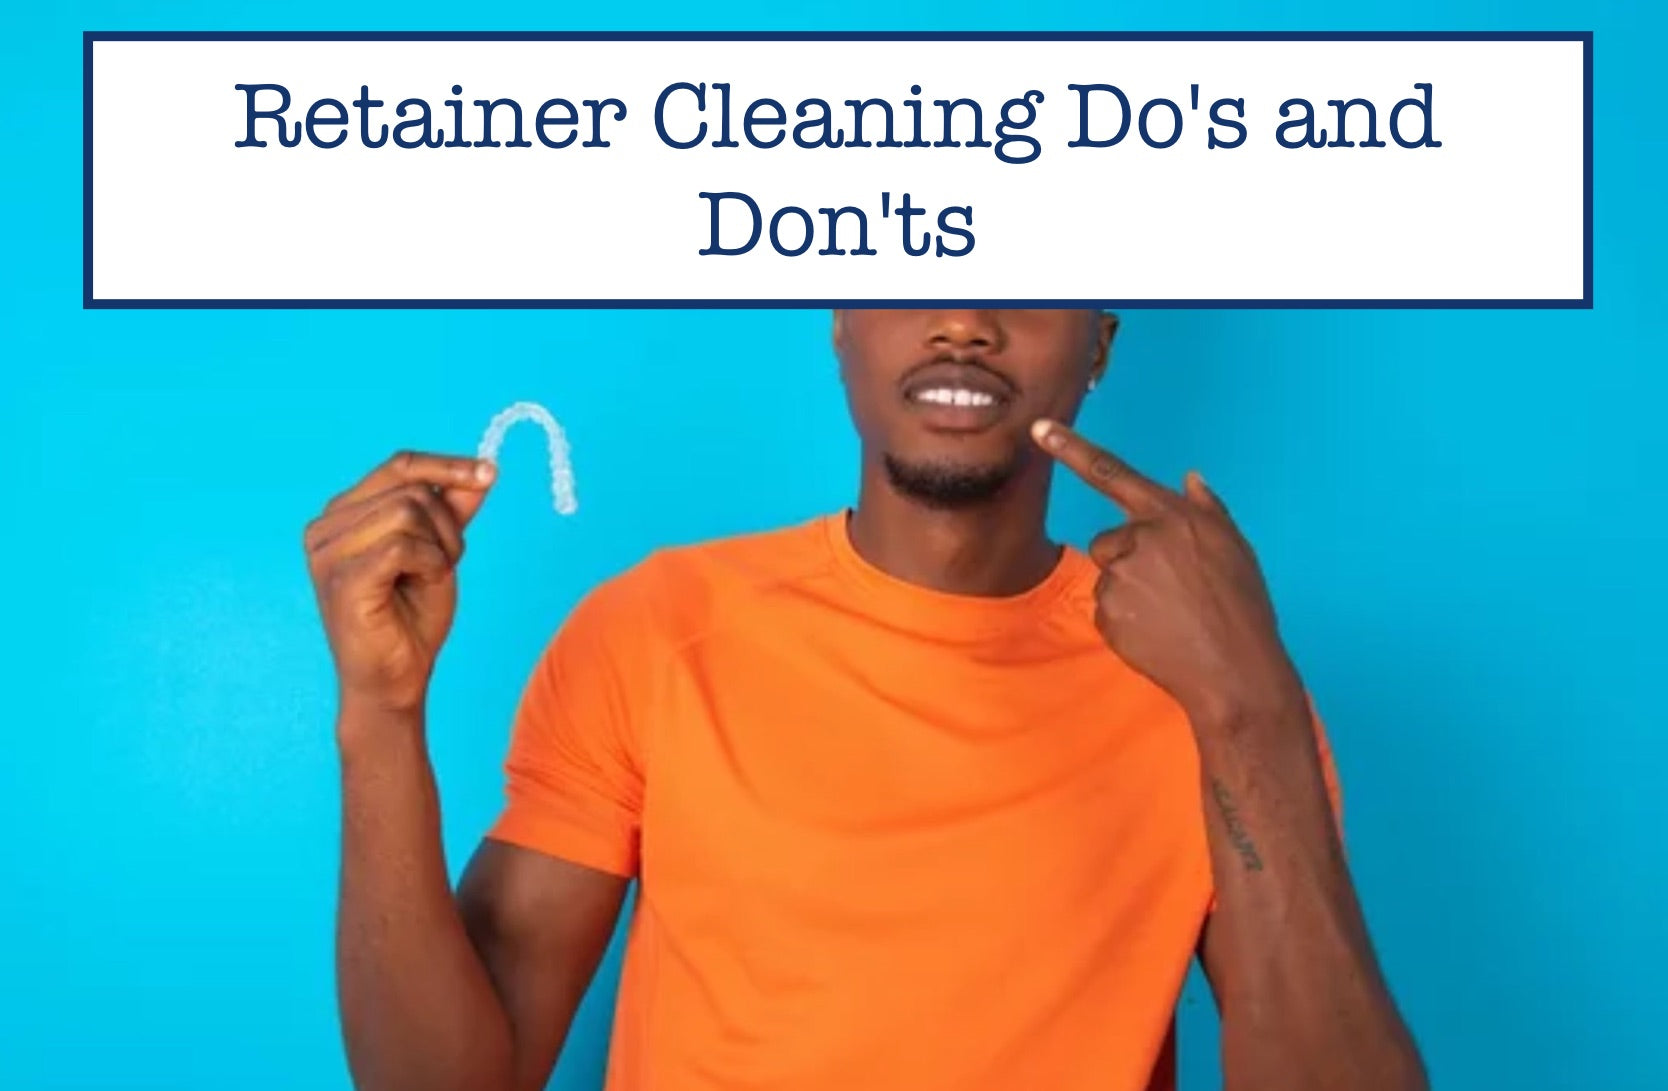 Retainer Cleaning Do's and Don'ts